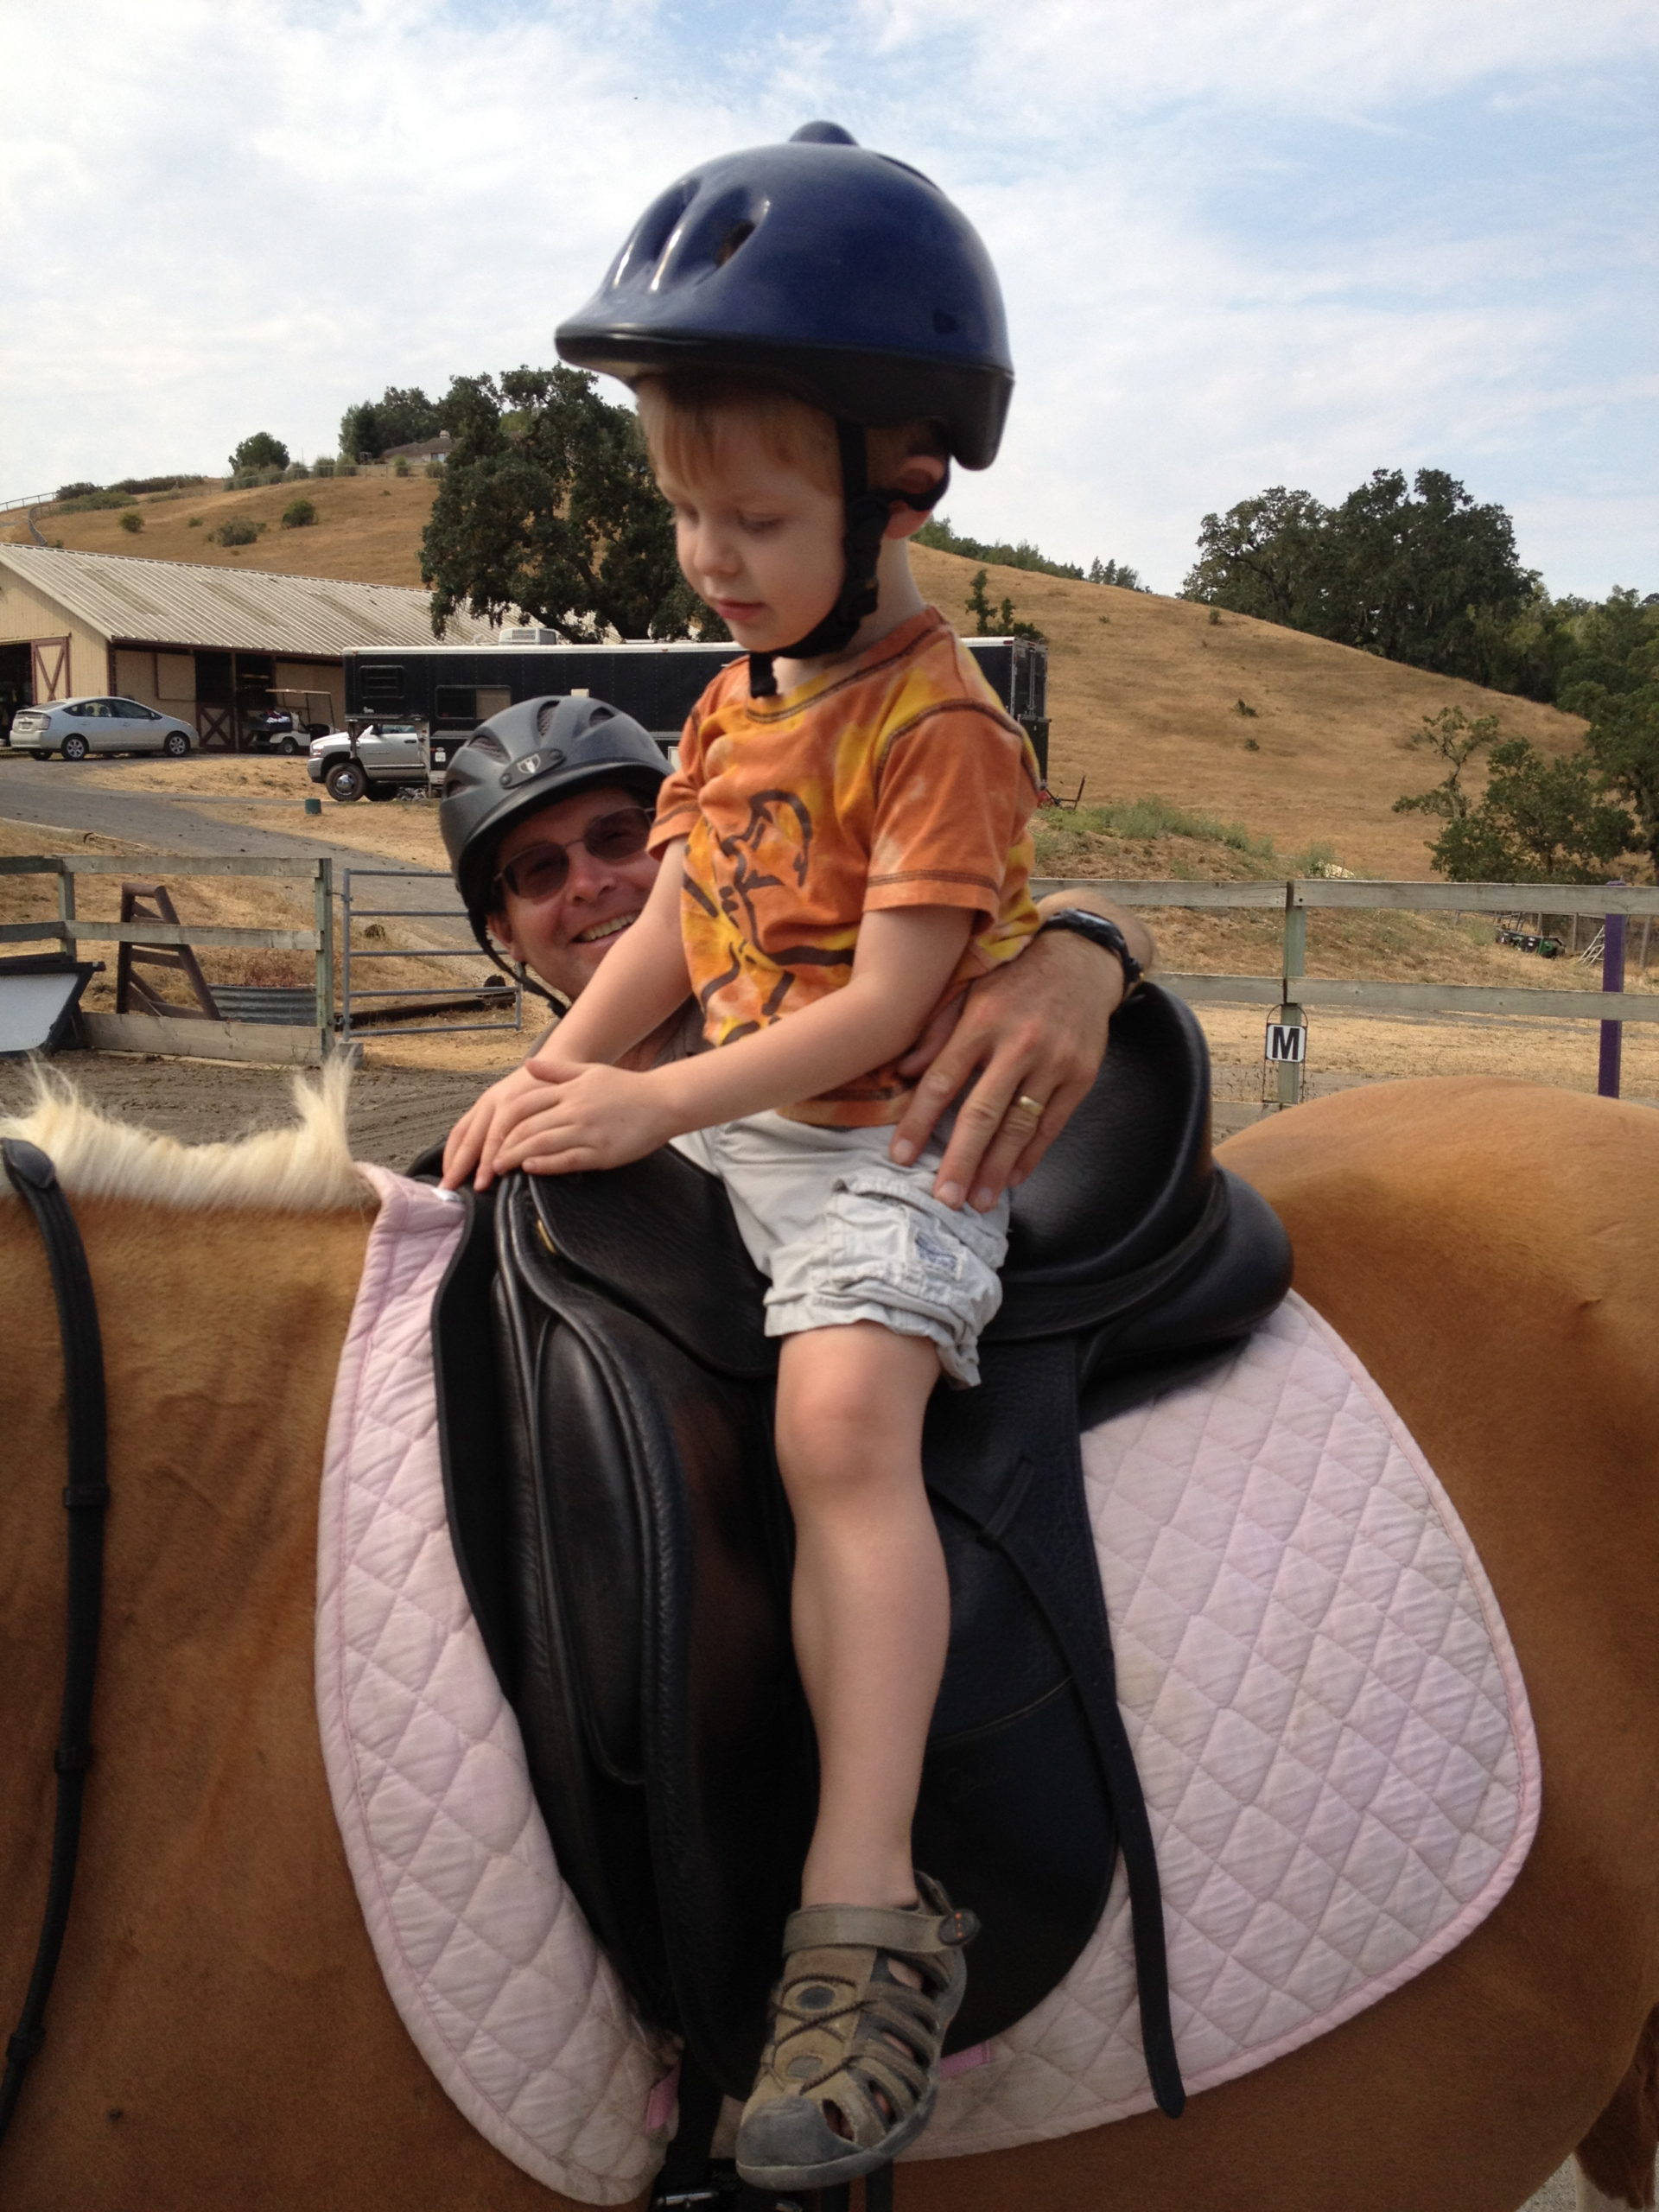 Being A Father Is Making Me a Better Horseman